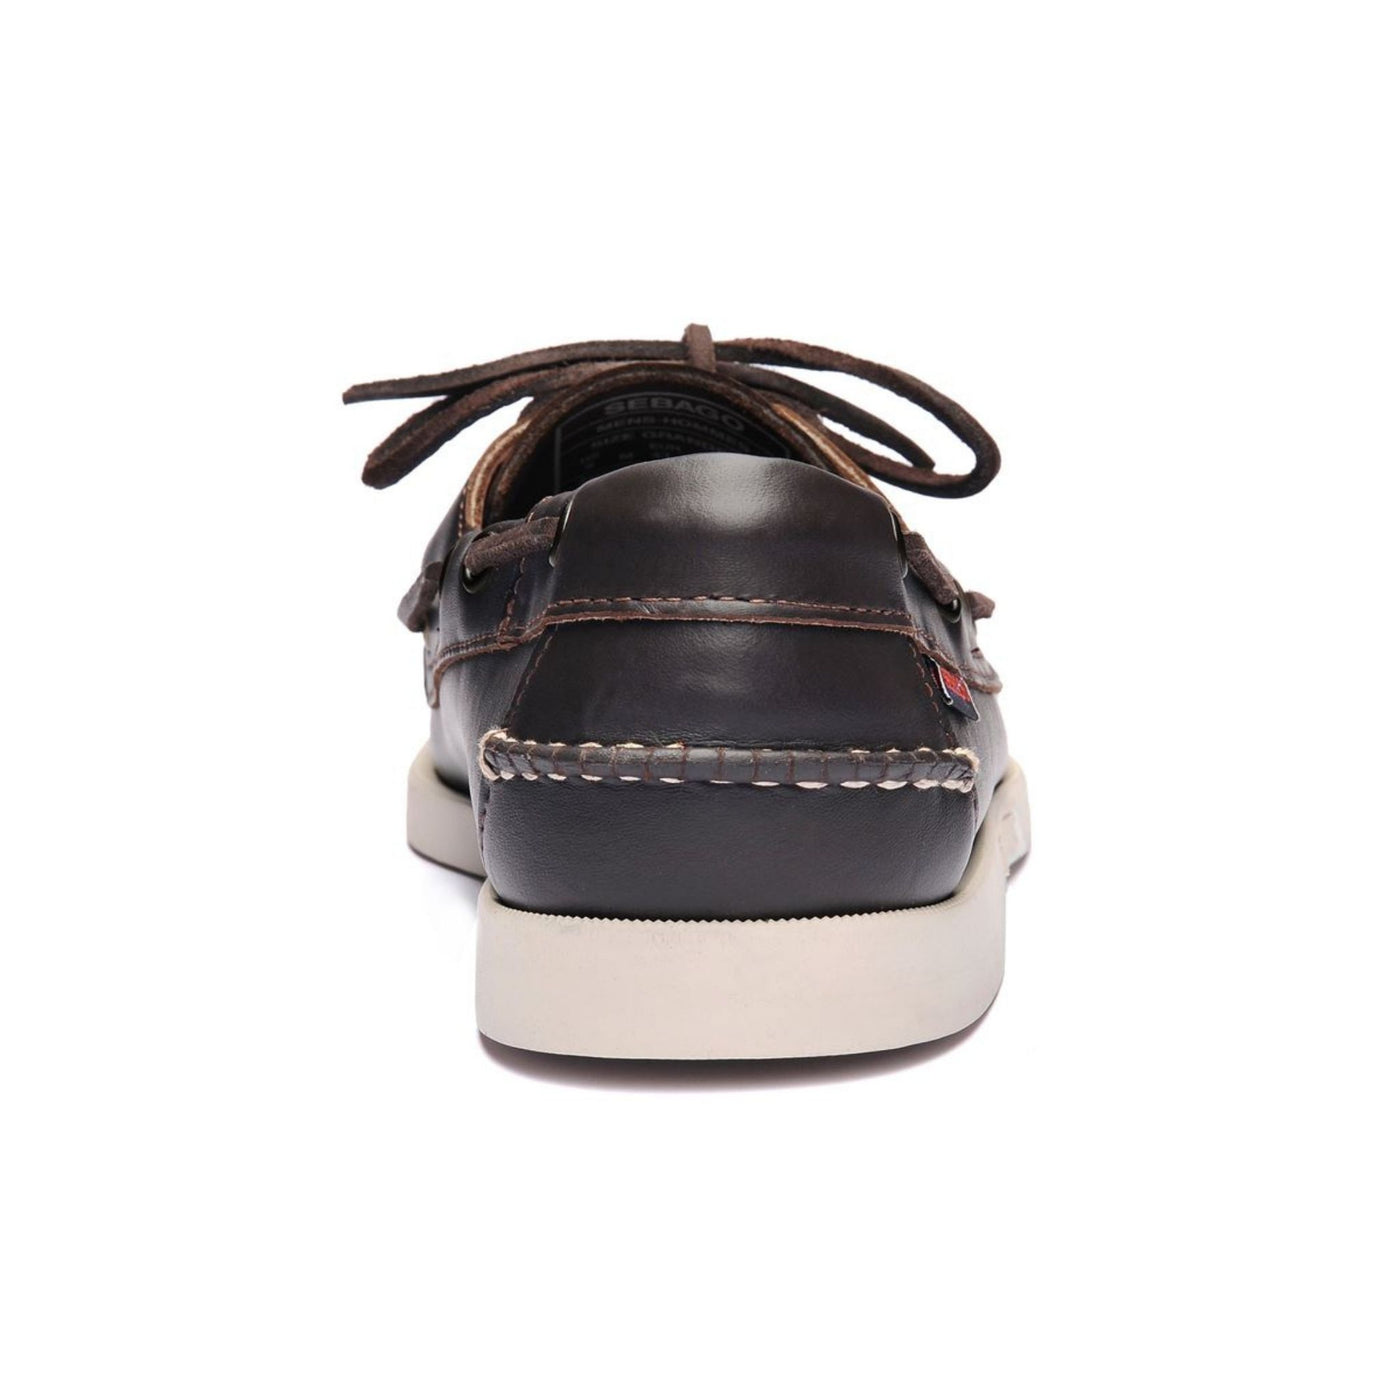 Men's Portland moccasin in smooth leather 